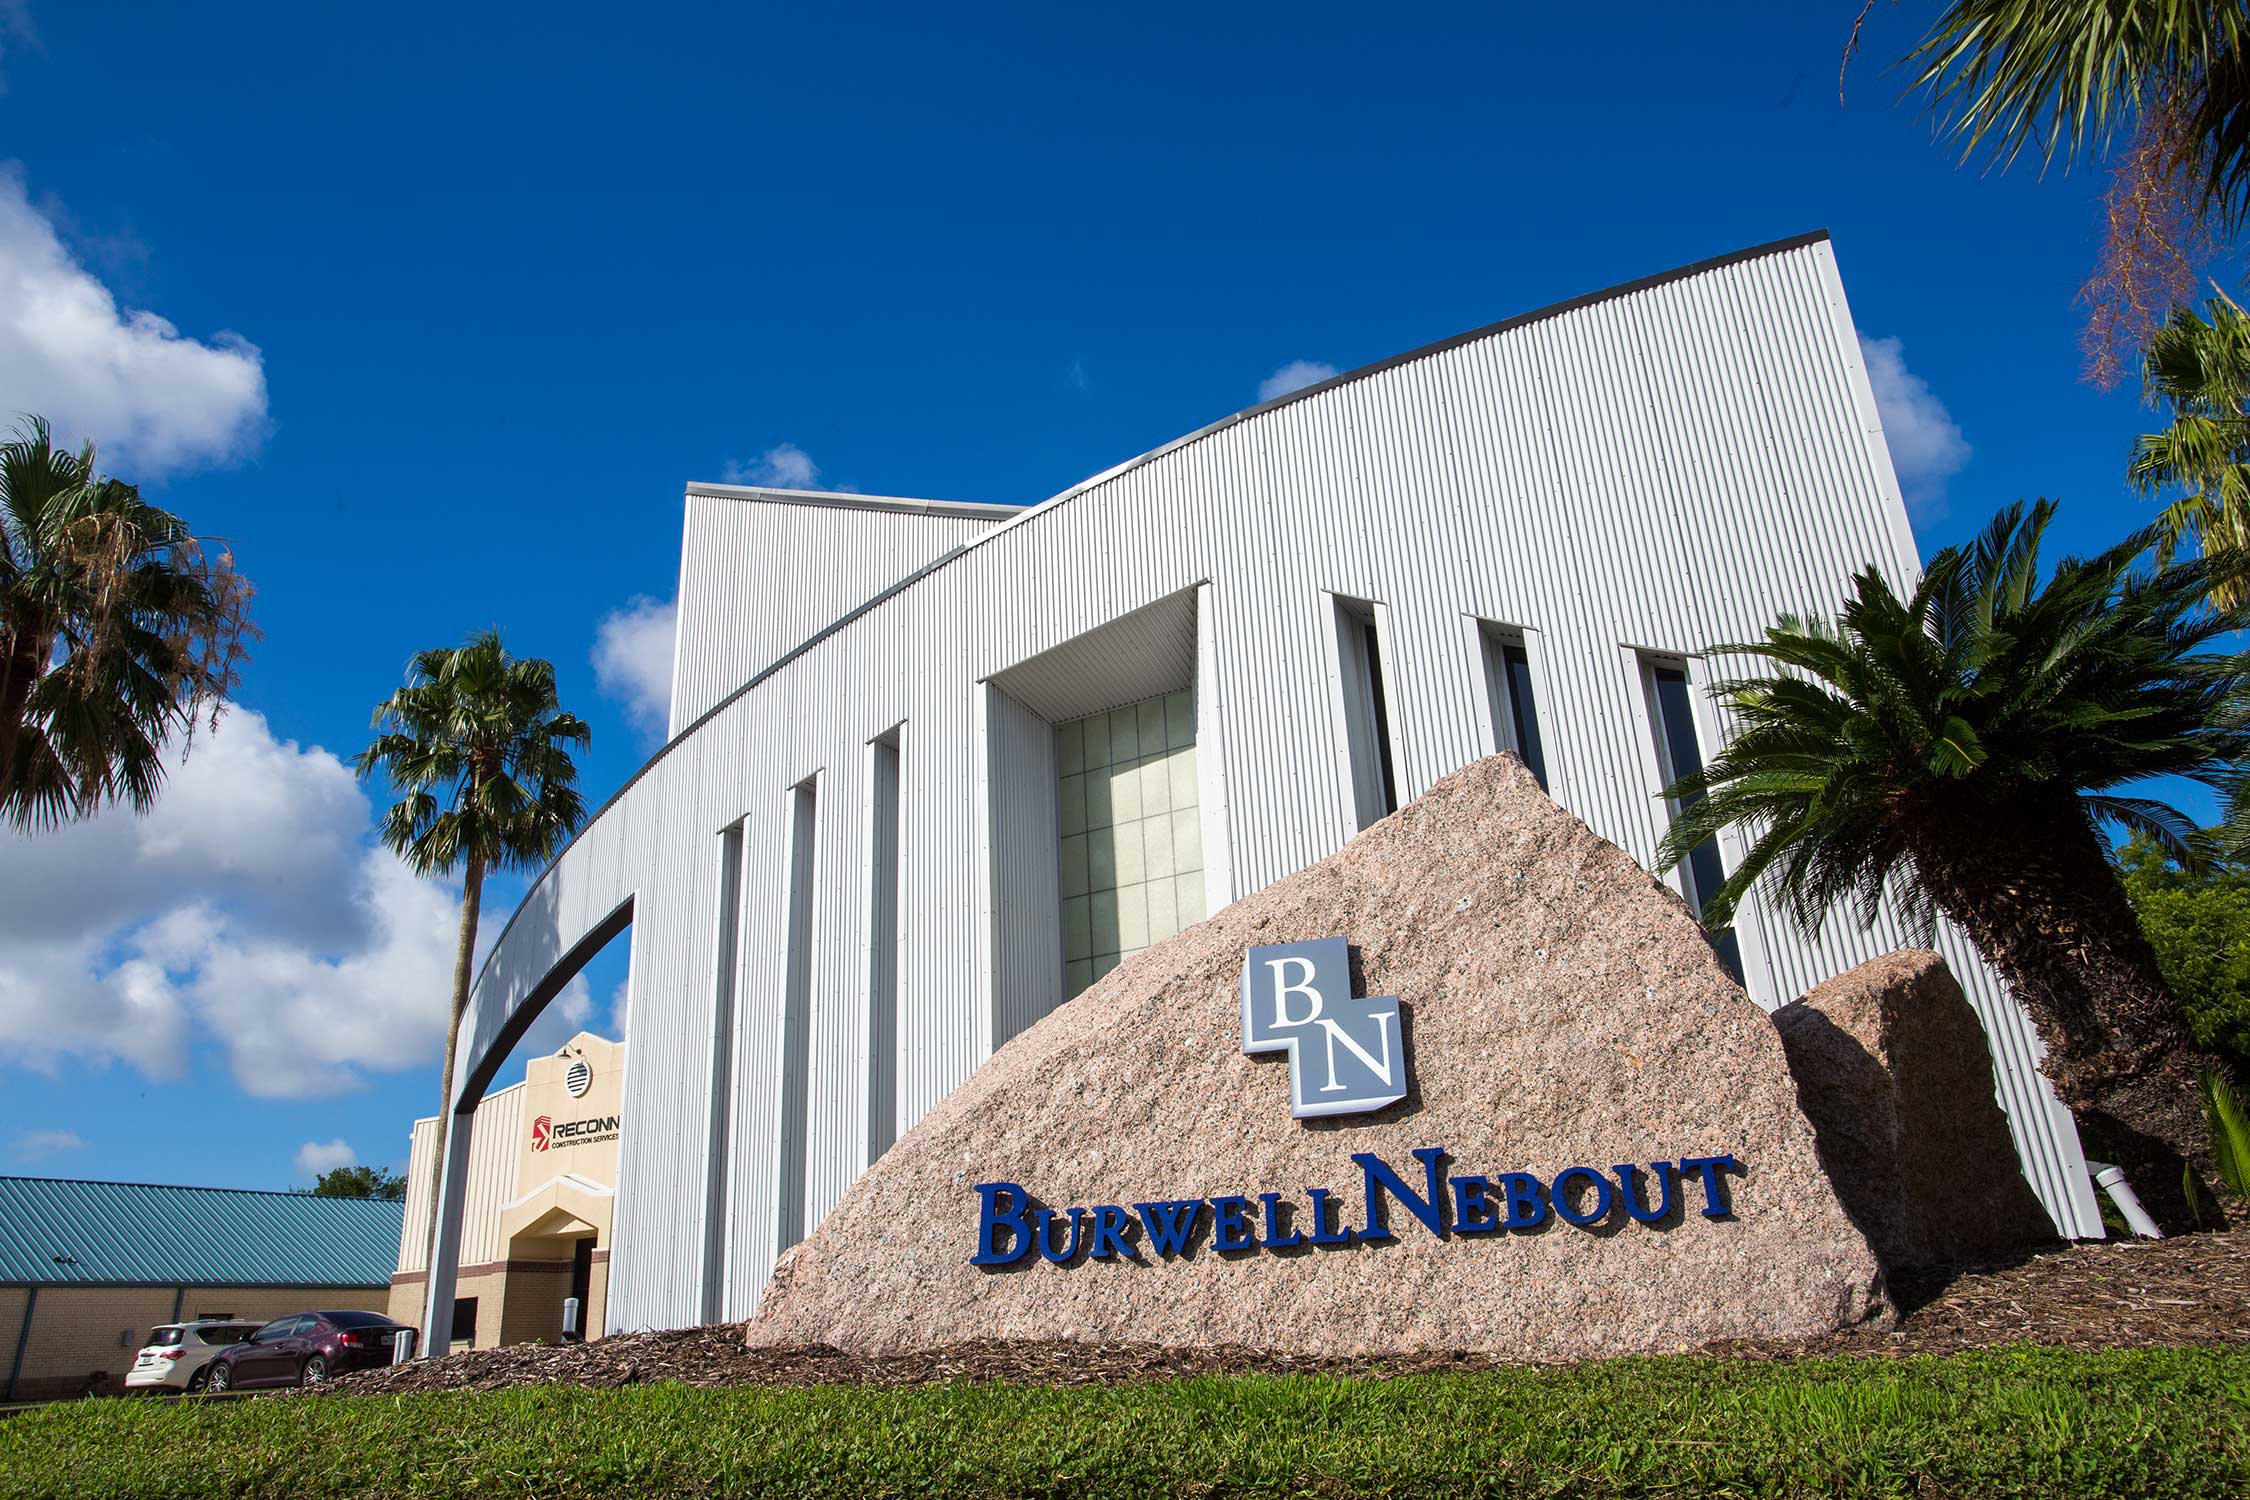 Staff and facility photos used in the development of a website for Burwell Nebout law firm.